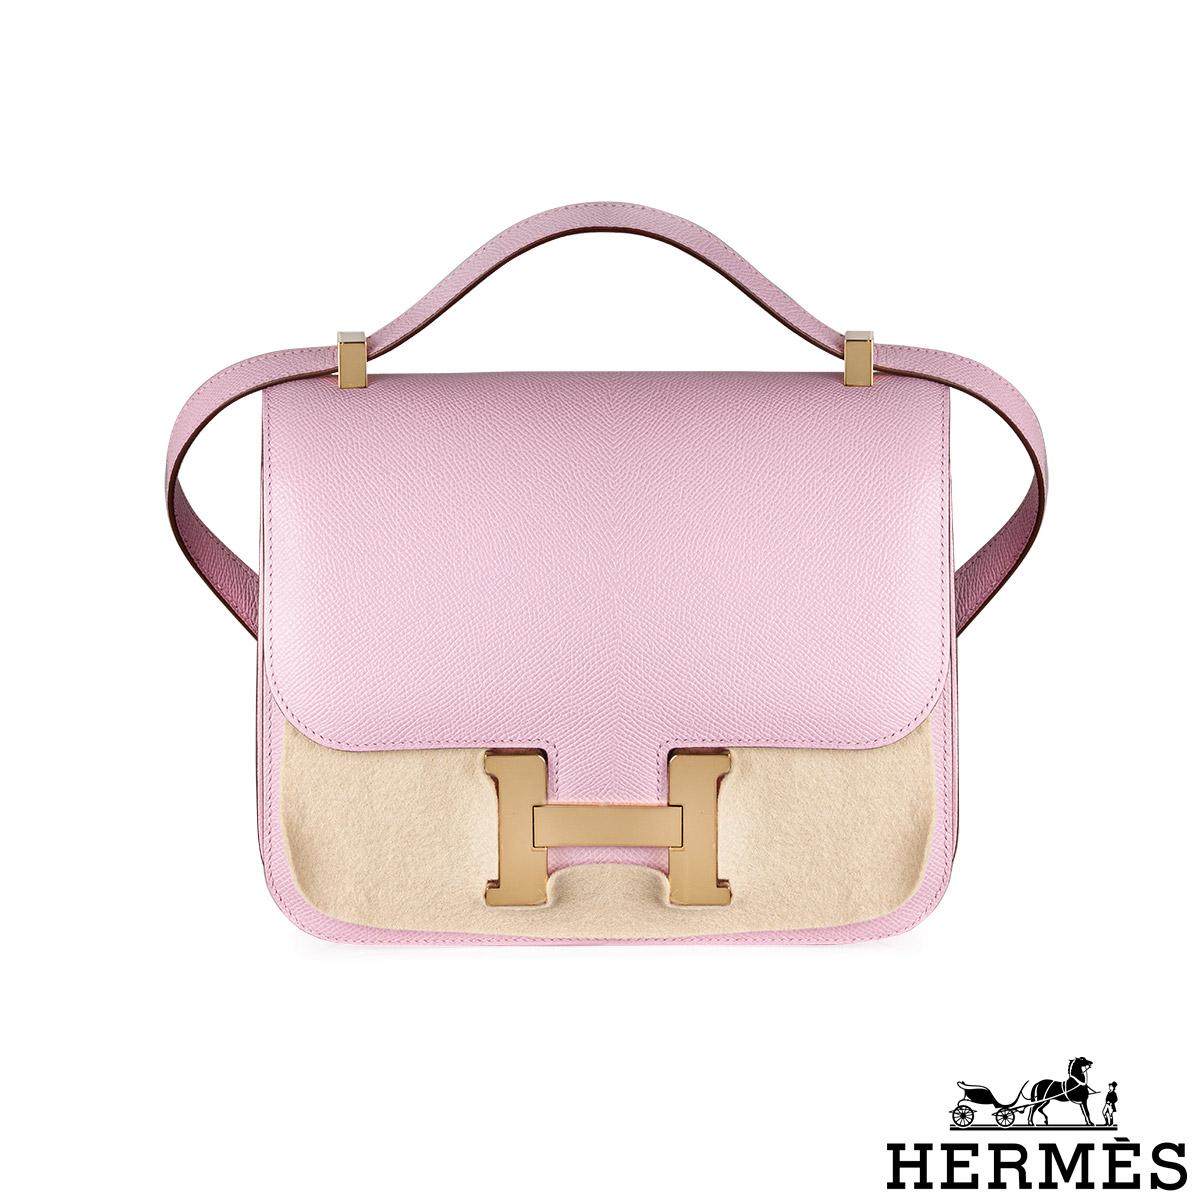 A lovely Hermès Constance 24cm handbag. The exterior of this Sac Constance III is crafted in Mauve Sylvestre Epsom leather with tonal stitching, a rose gold-tone hardware 